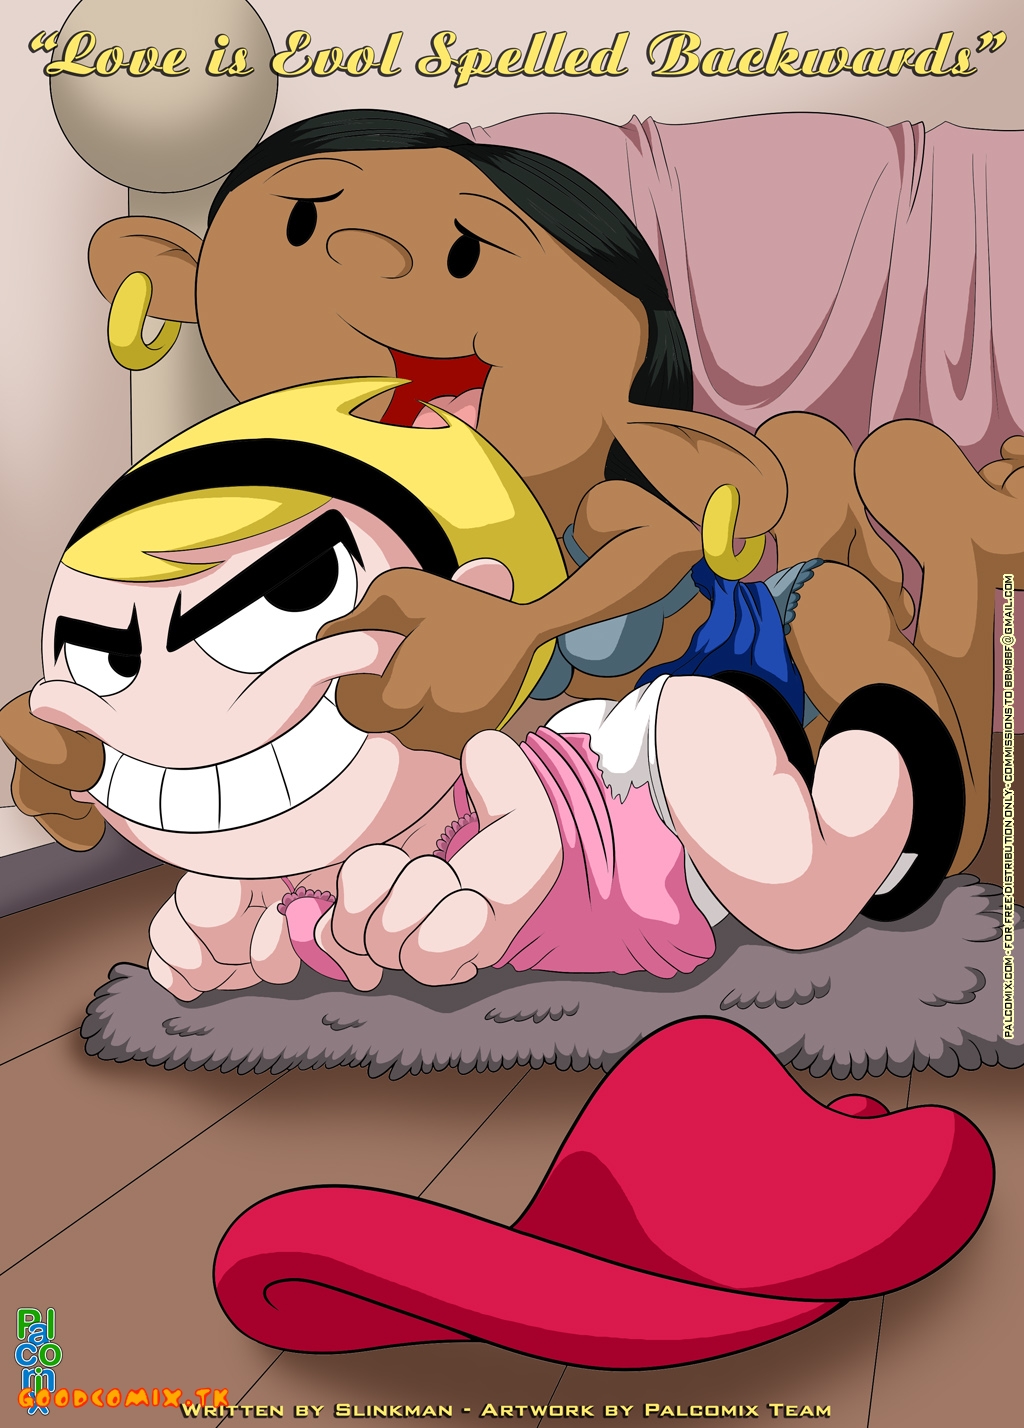 SureFap xxx porno The  Grim Adventures of Billy and Mandy - The Kids Next Door - [Palcomix] - Love is Evol Spelled Backwards (Abigail Lincoln, Mandy)